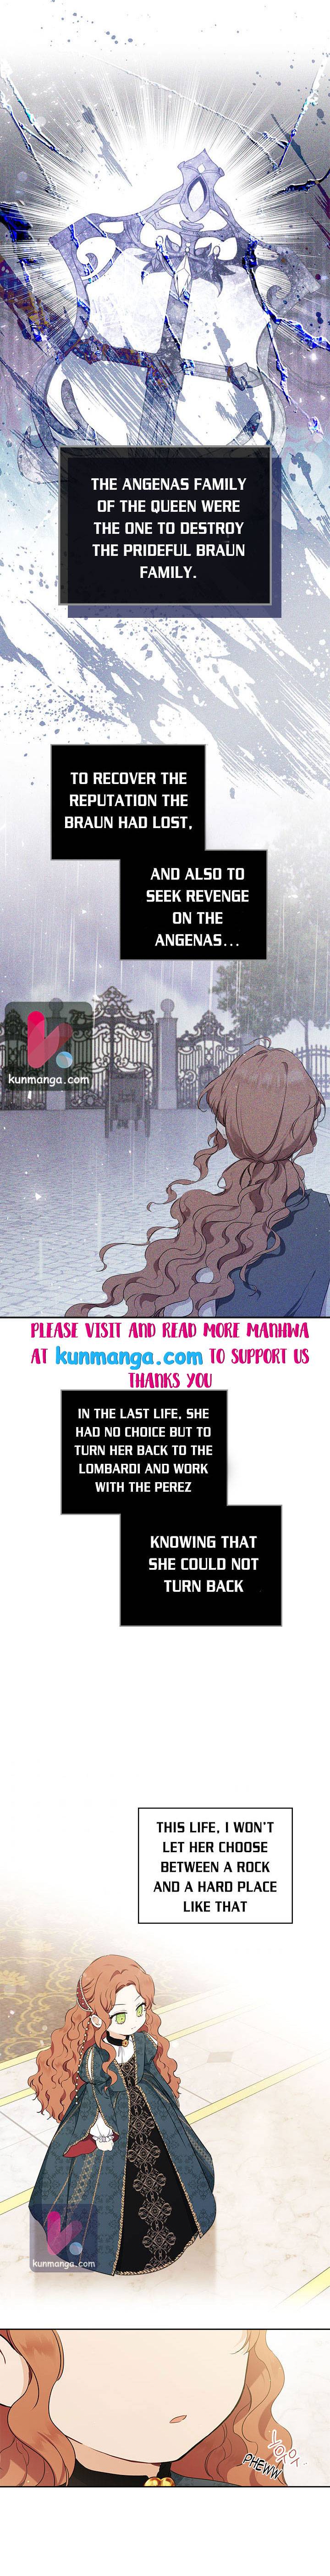 I’ll be the matriarch in this life Chapter 44 I’ll be the matriarch in this life 44 Read I’ll be the matriarch in this life Chapter 44 I’ll be the matriarch in this life Chapter 44 Manga I’ll be the matriarch in this life Chapter 44 english I’ll be the matriarch in this life Chapter 44 raw manga I’ll be the matriarch in this life Chapter 44 online I’ll be the matriarch in this life Chapter 44 high quality I’ll be the matriarch in this life 44 chapter I’ll be the matriarch in this life Chapter 44 manga scan